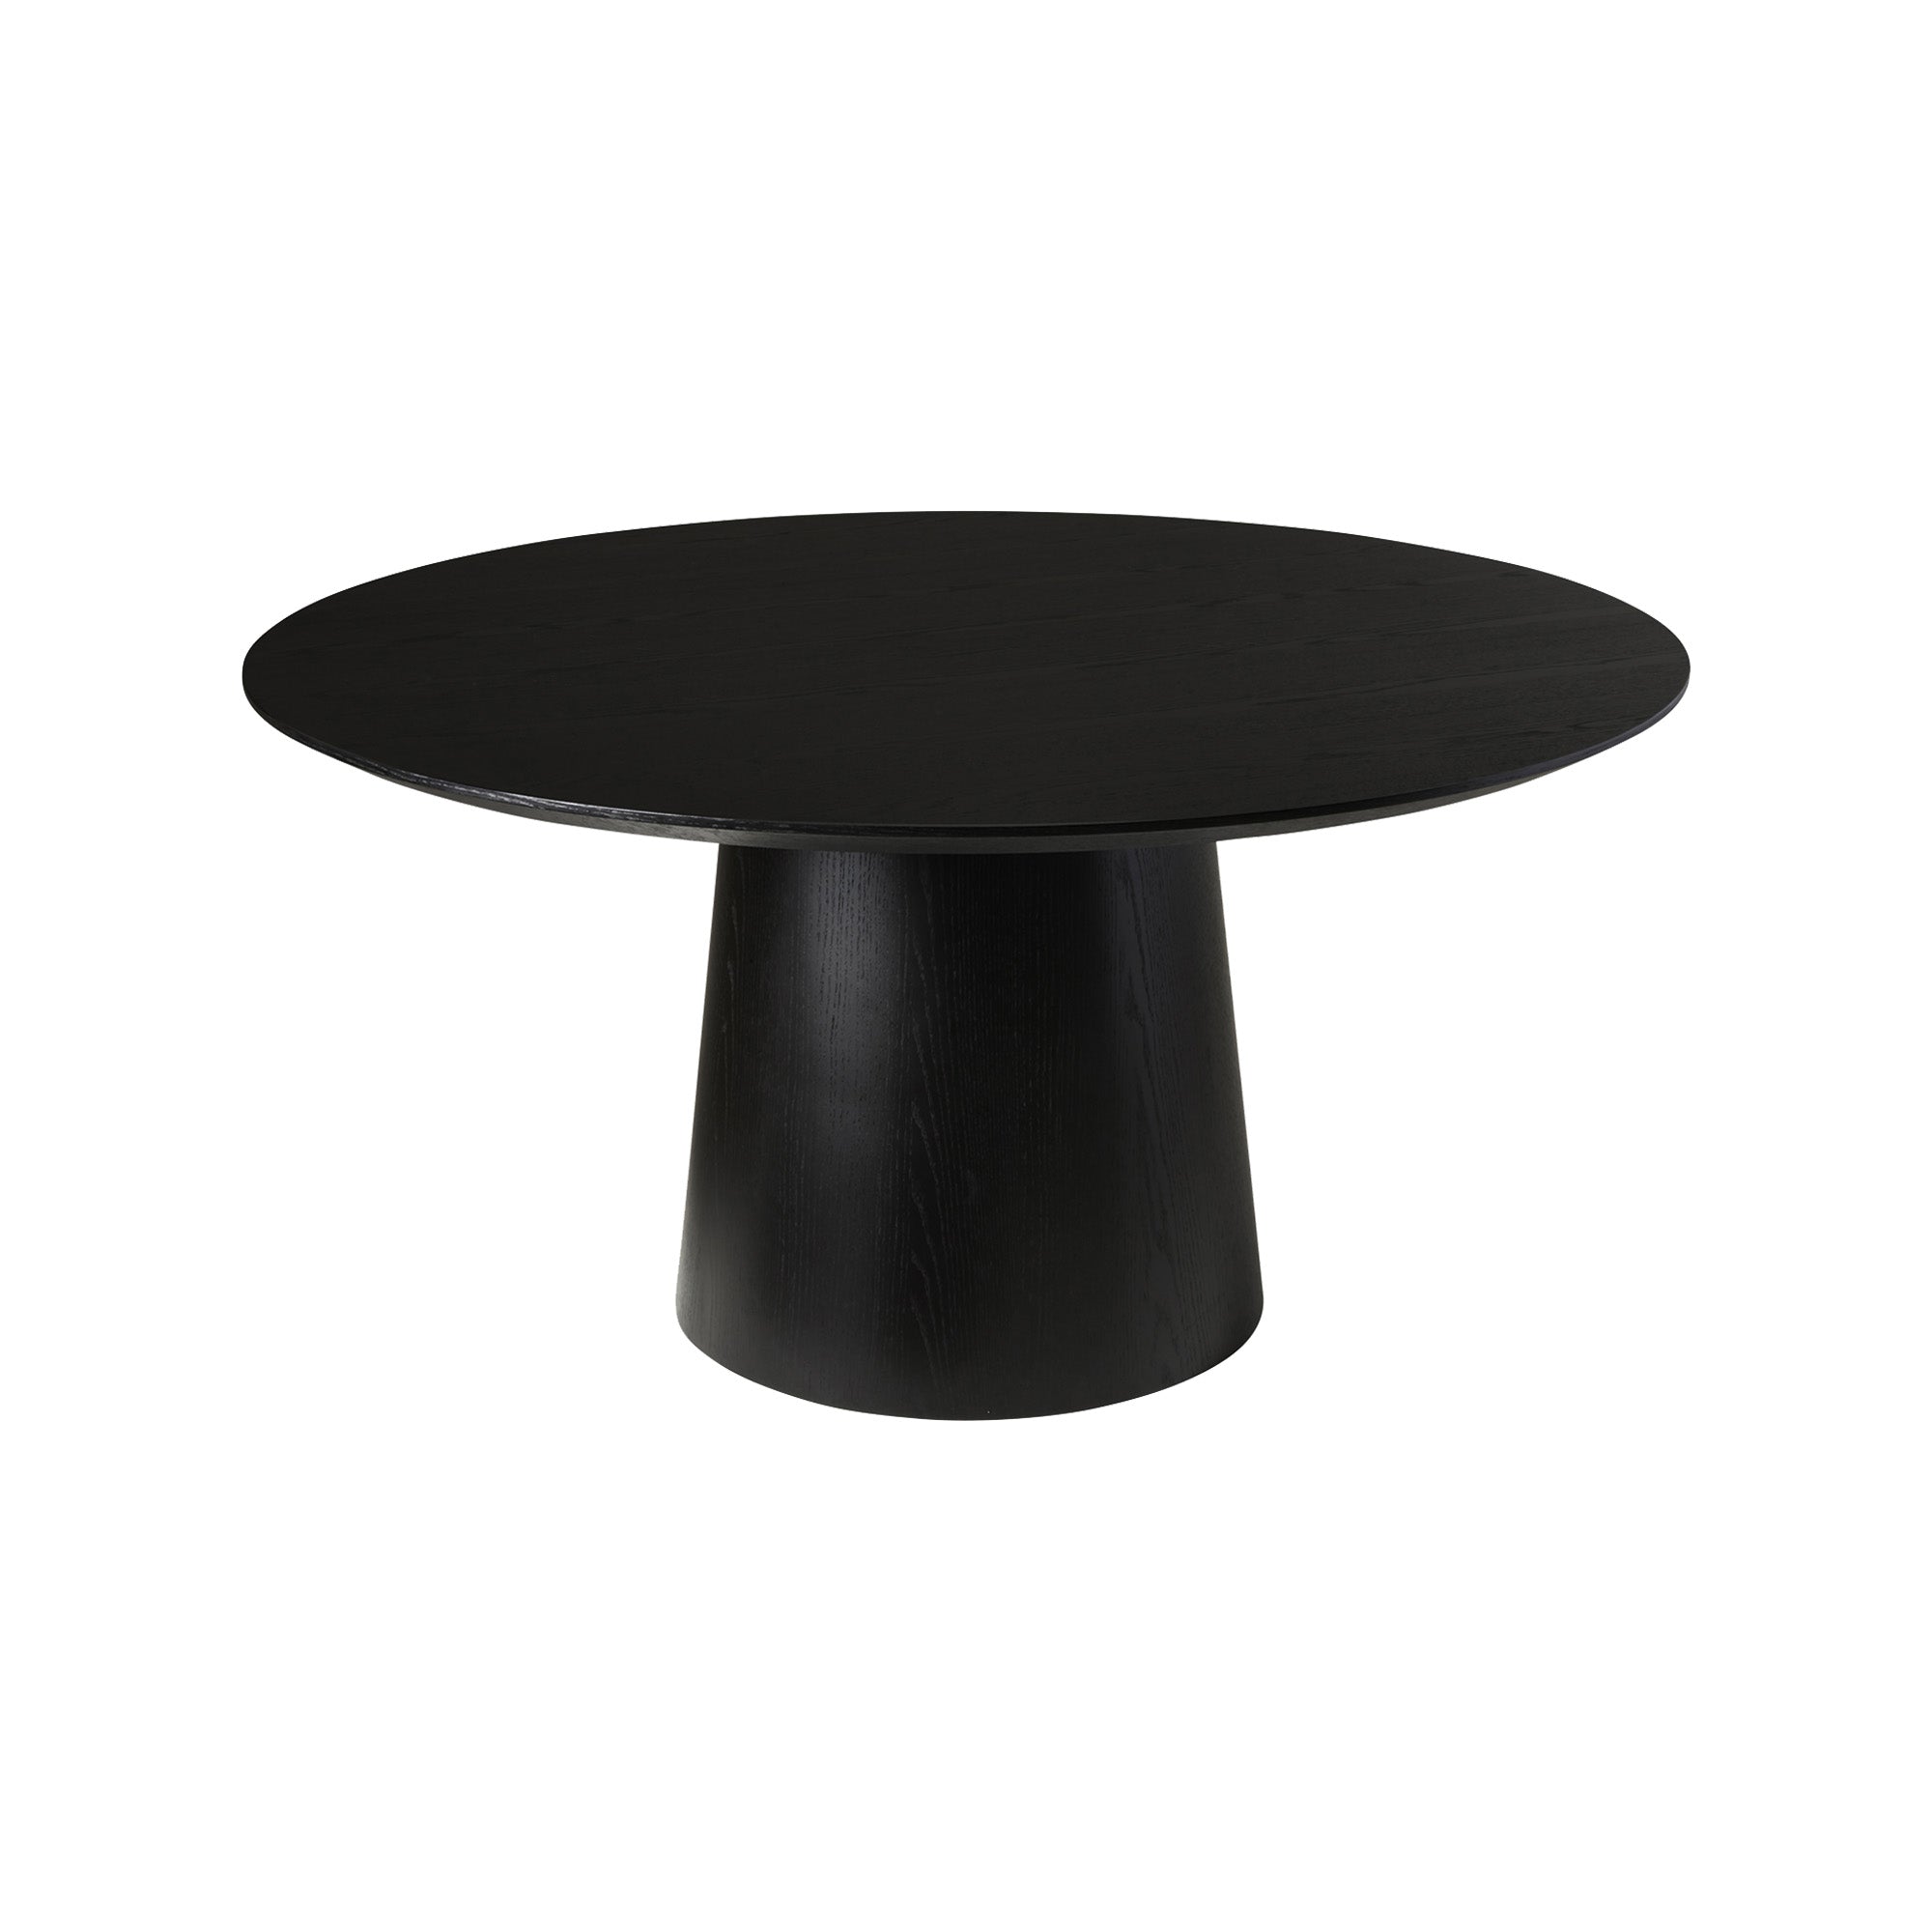 Pippa Round Dining Table Black Large